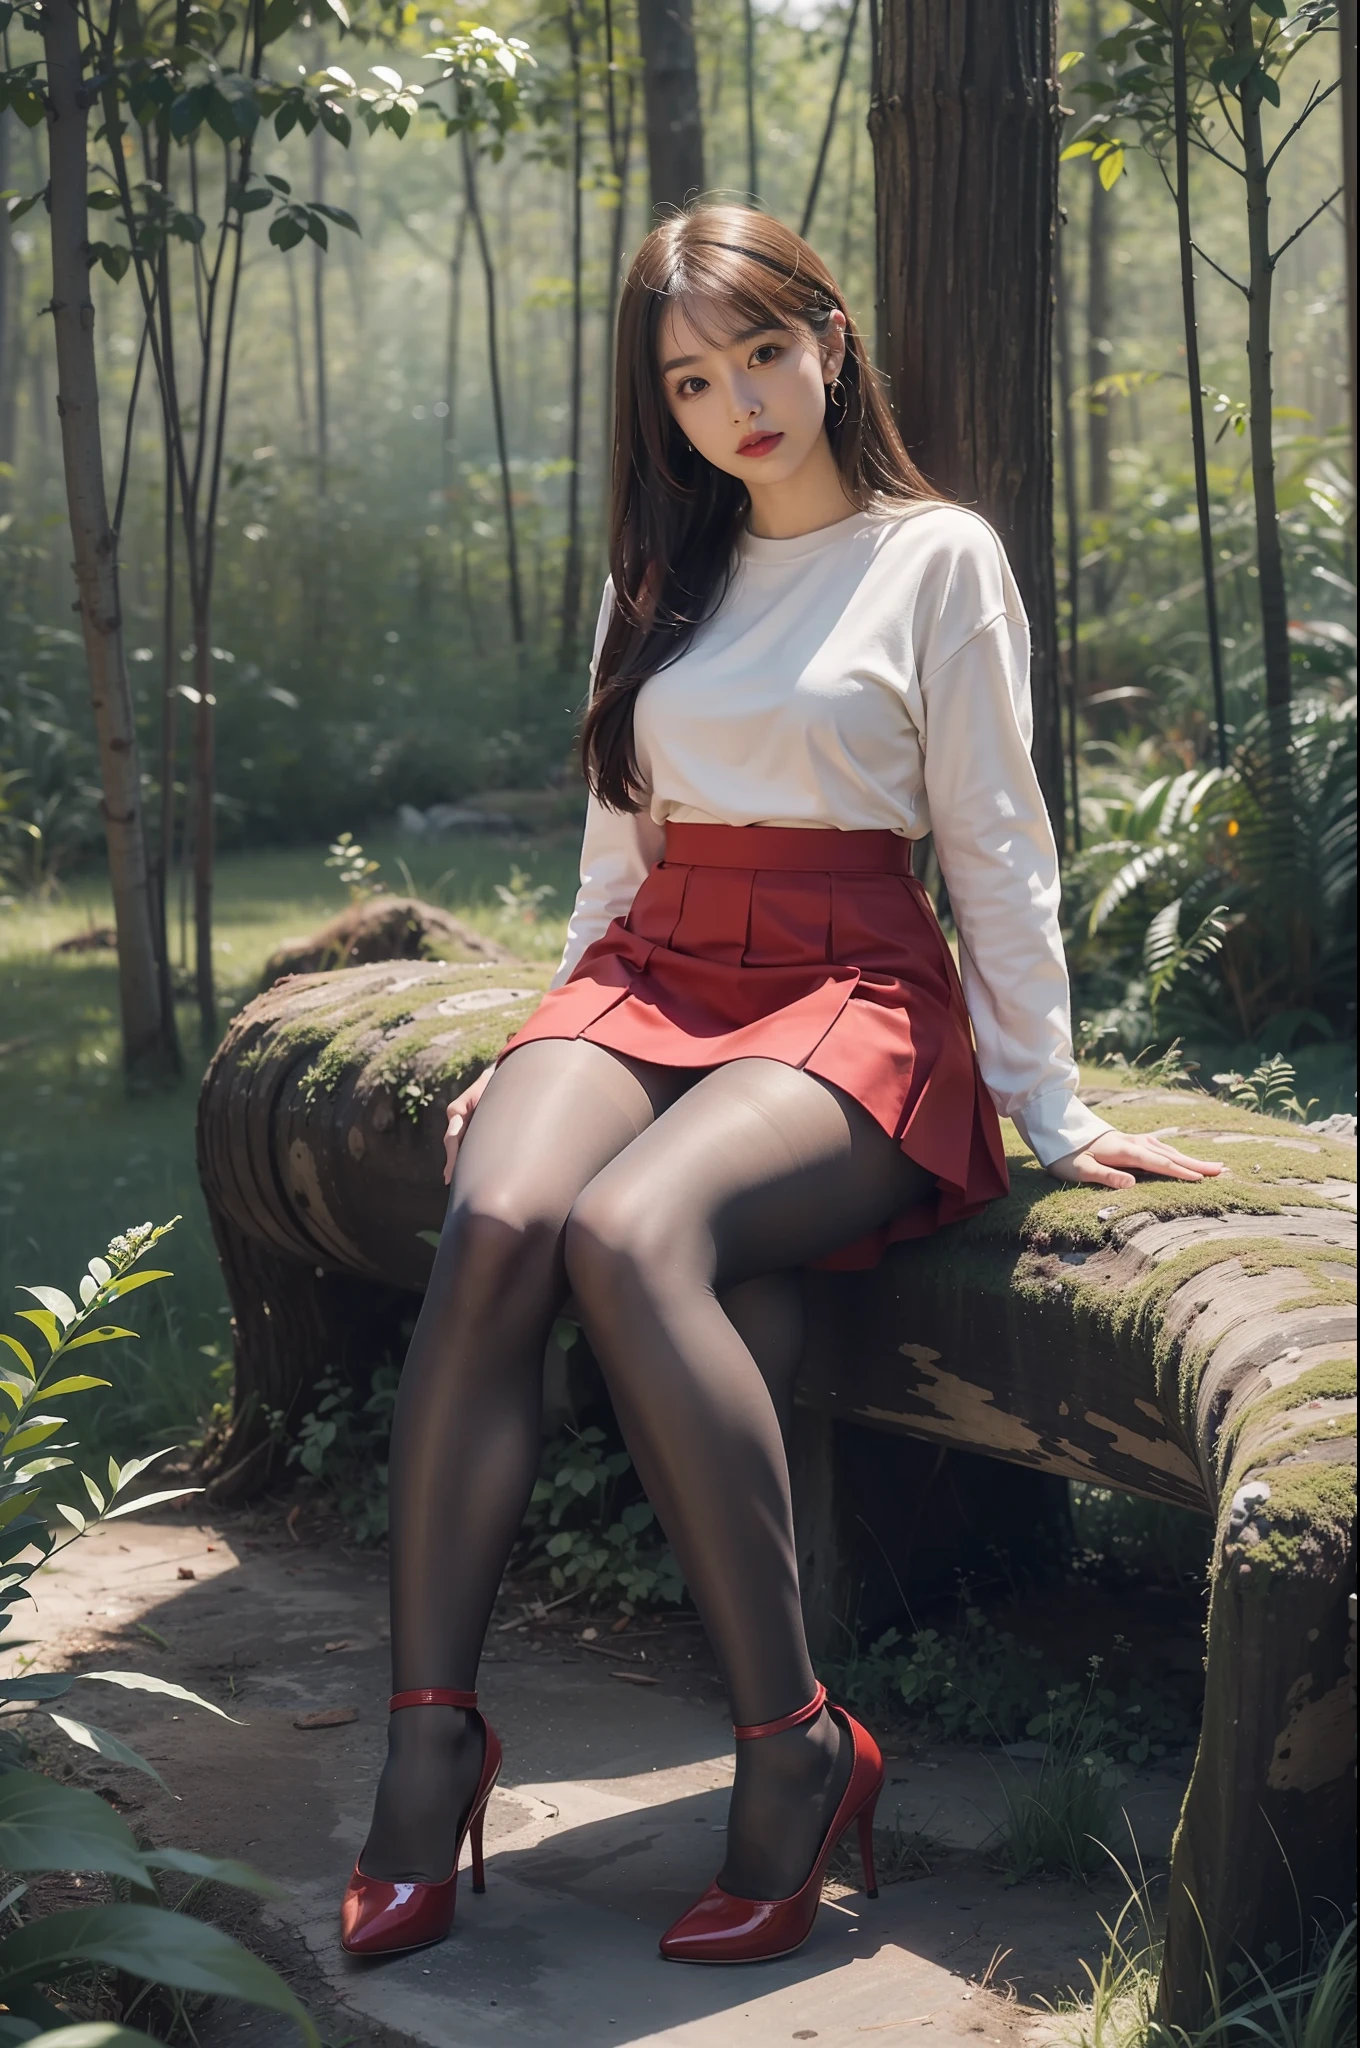 (full body:1.5)，(1girl:1.3),(view the viewer:1.4)，(anatomy correct:1.3),(Sitting in the forest gesticulating with hands and feet:1.2),(Wearing a red skirt:1.2),( Very thick Lime Pantyhose:1.3),( girl pointed thick heels :1.1)，(Accurate and perfect face:1.3),hyper HD, Ray traching, reflective light， structurally correct, Award-Awarded, high detail, lighten shade contrast, Face lighting ，cinematic lighting, masterpiece, super detailing, high quality, high detail, best quality, 16k，High contrast,